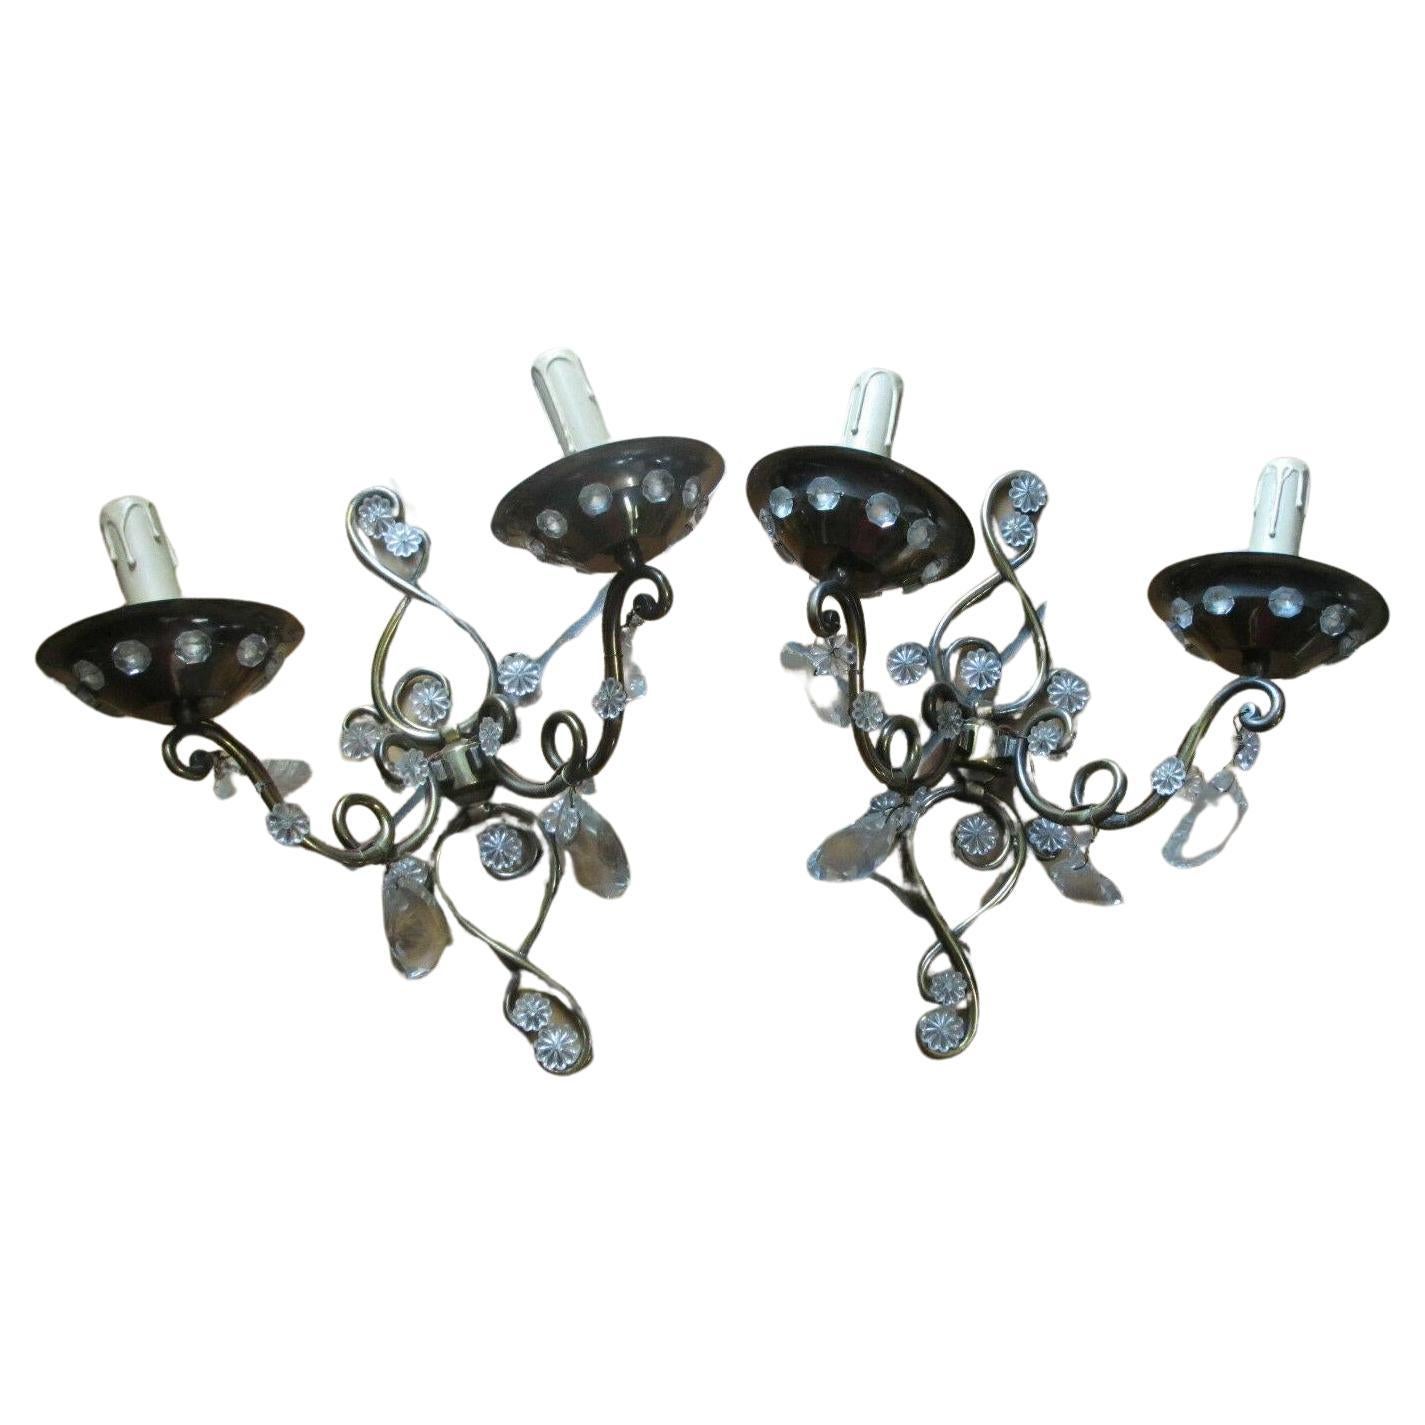 c1925 French Art Deco attrib. Maison Bagues Crystal/ Scrolled Iron Wall Sconces